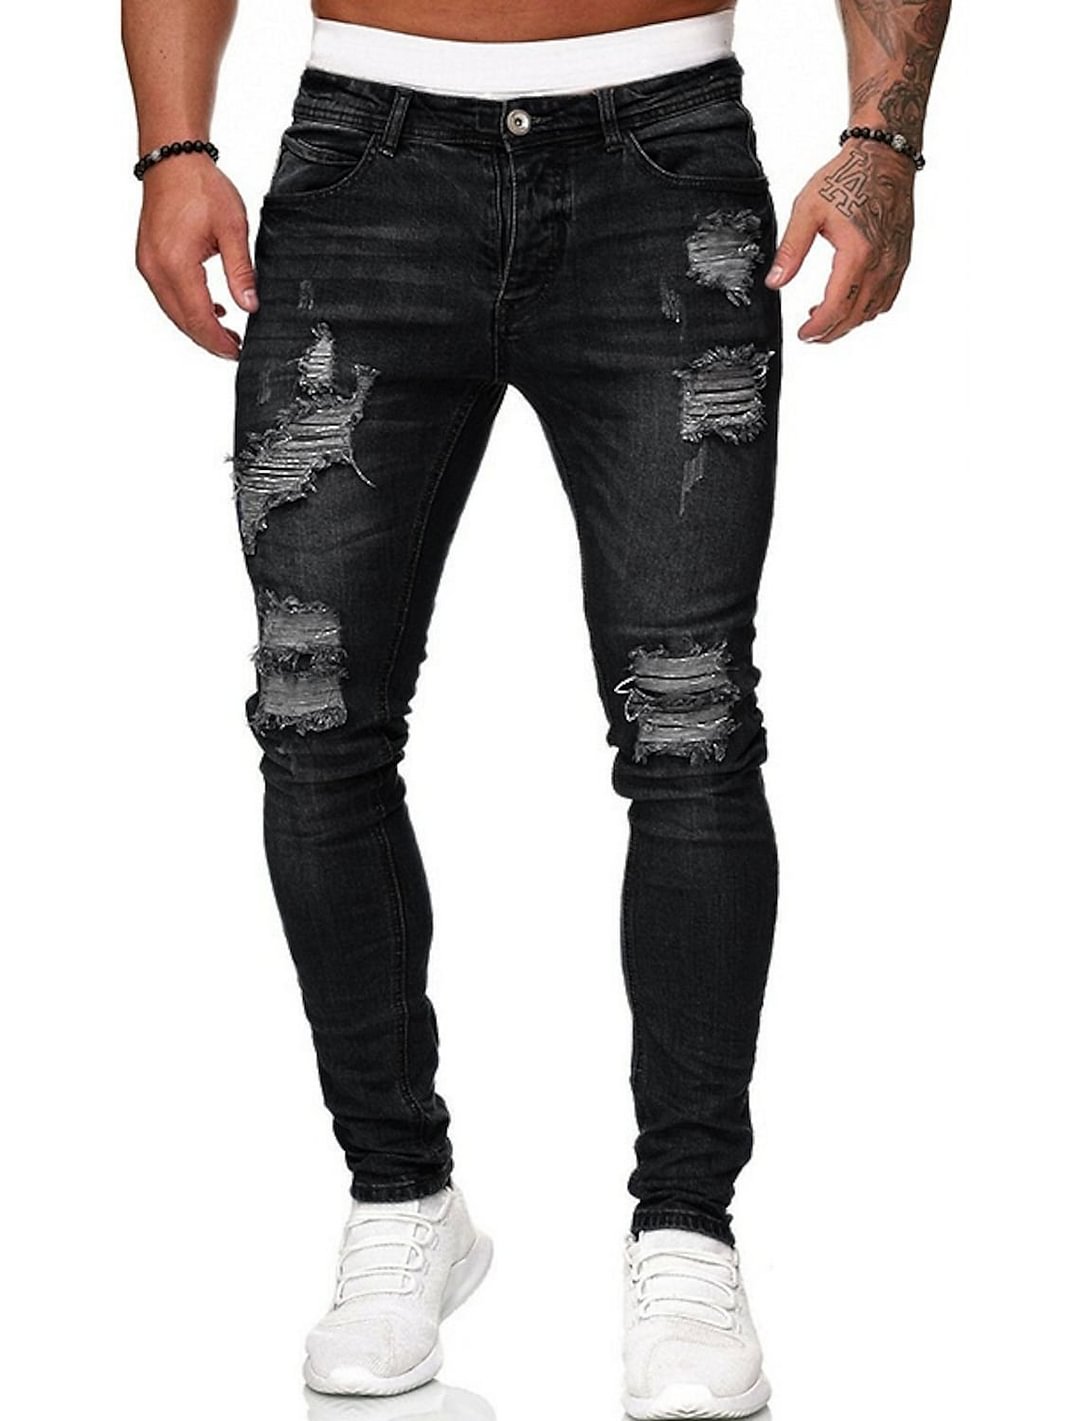 men‘s ripped jeans distressed jeans denim pants stretch slim-fit pants for men streetwear trousers tapered pants zipper and button fly